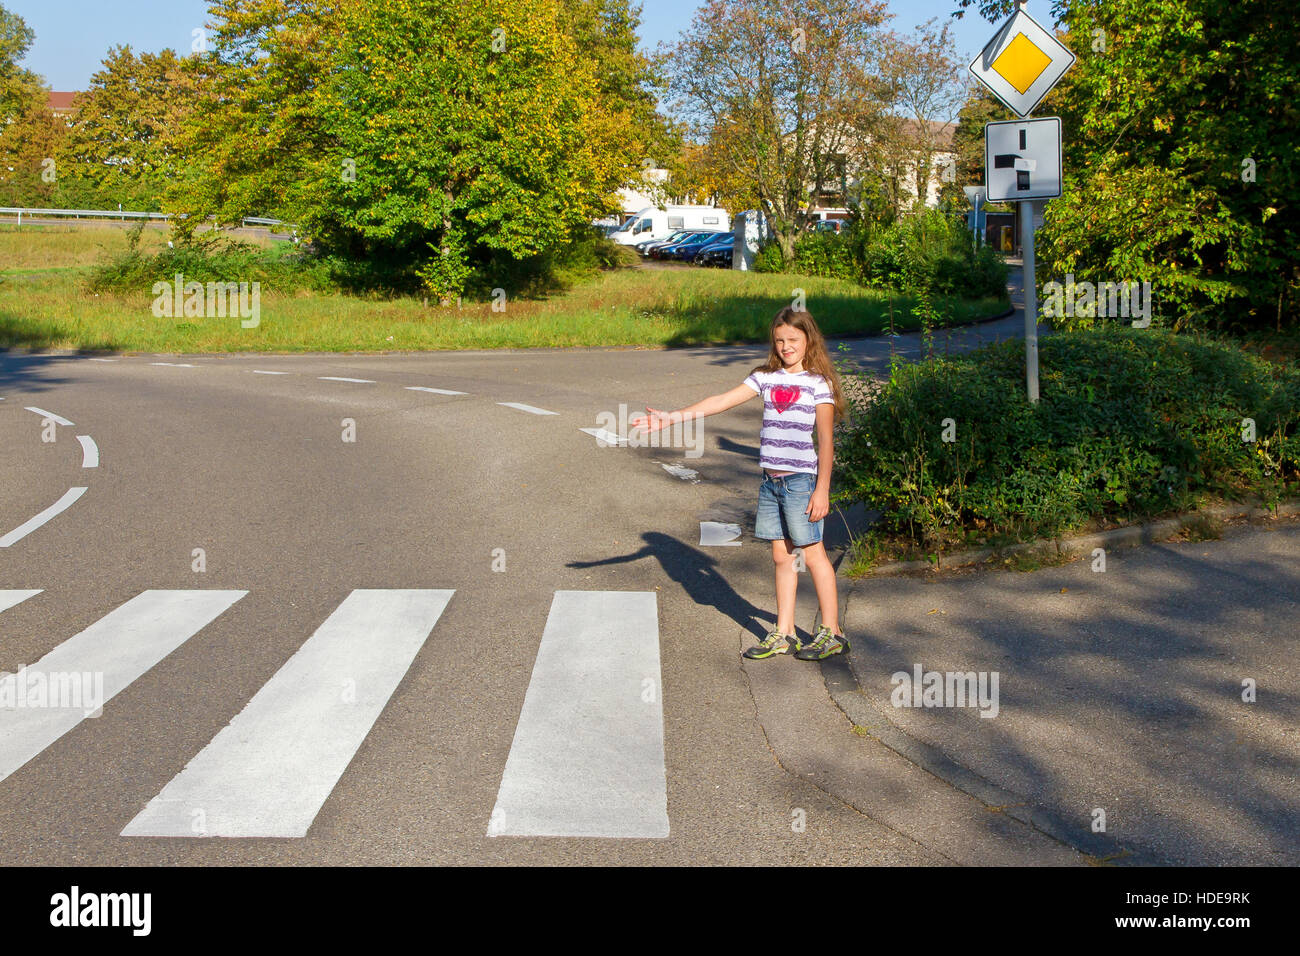 Young girl will go on the crosswalk Stock Photo